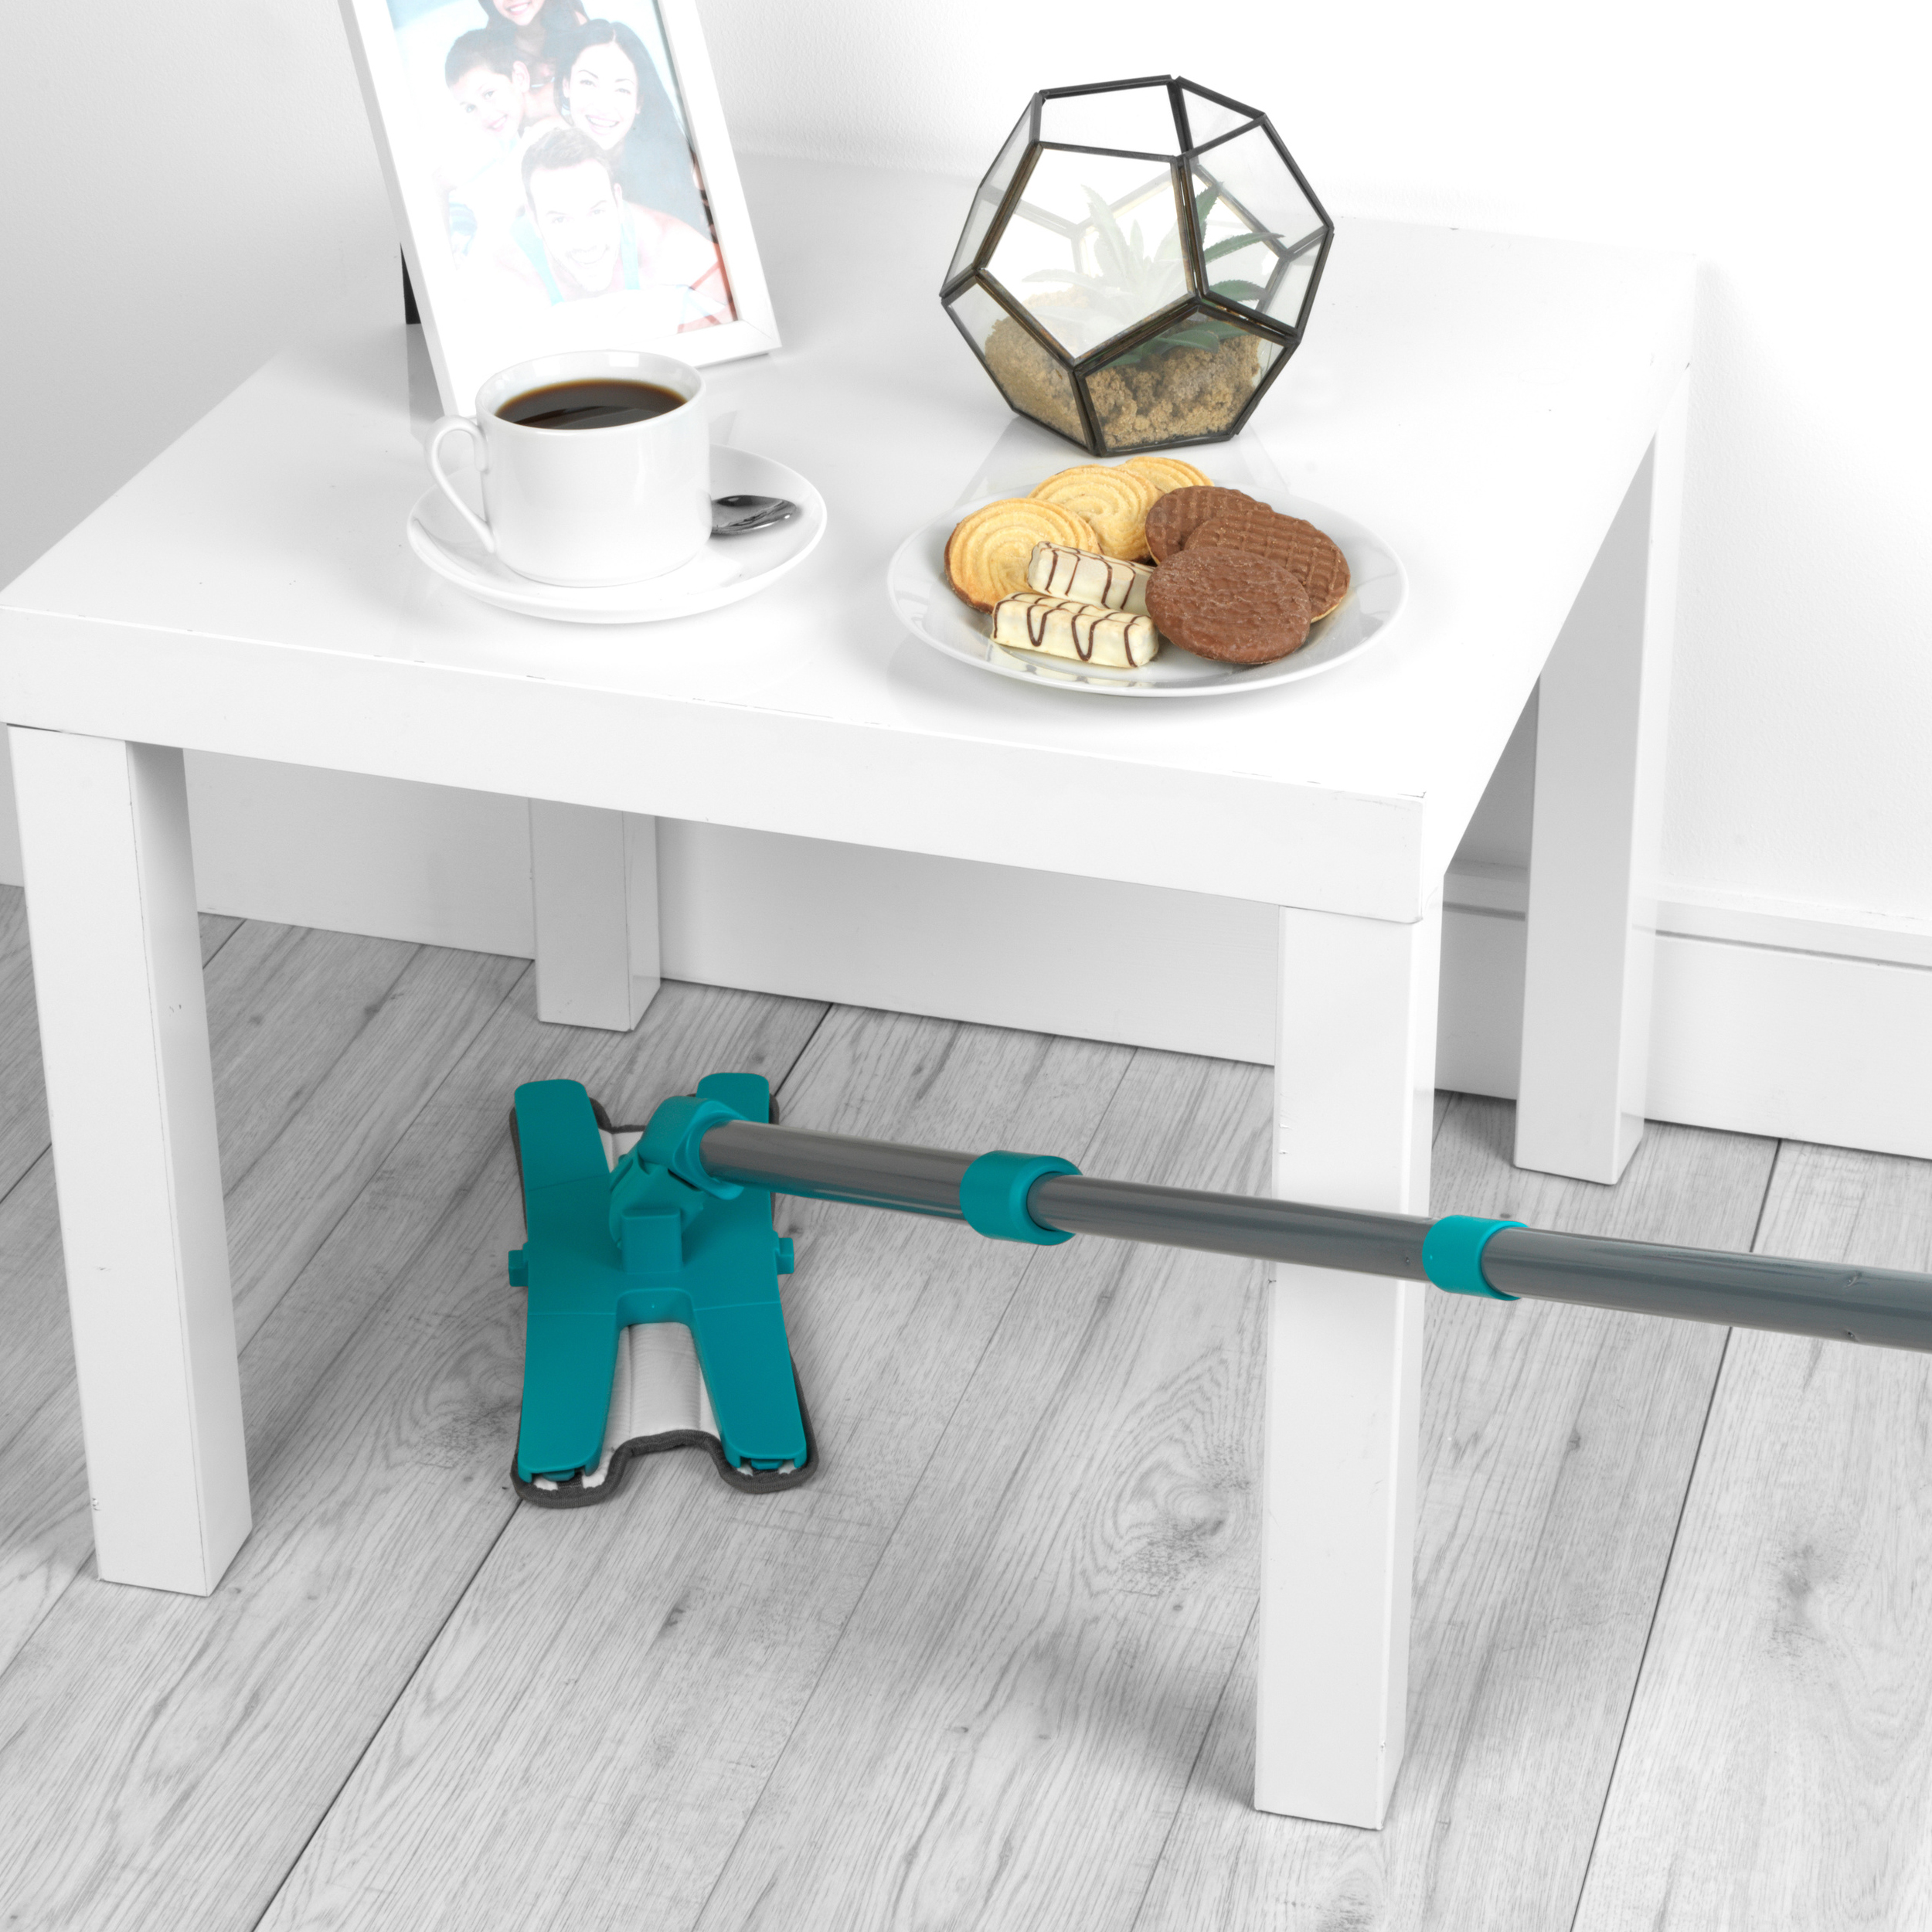 Beldray pet Plus TPR Mop being used under a low white table